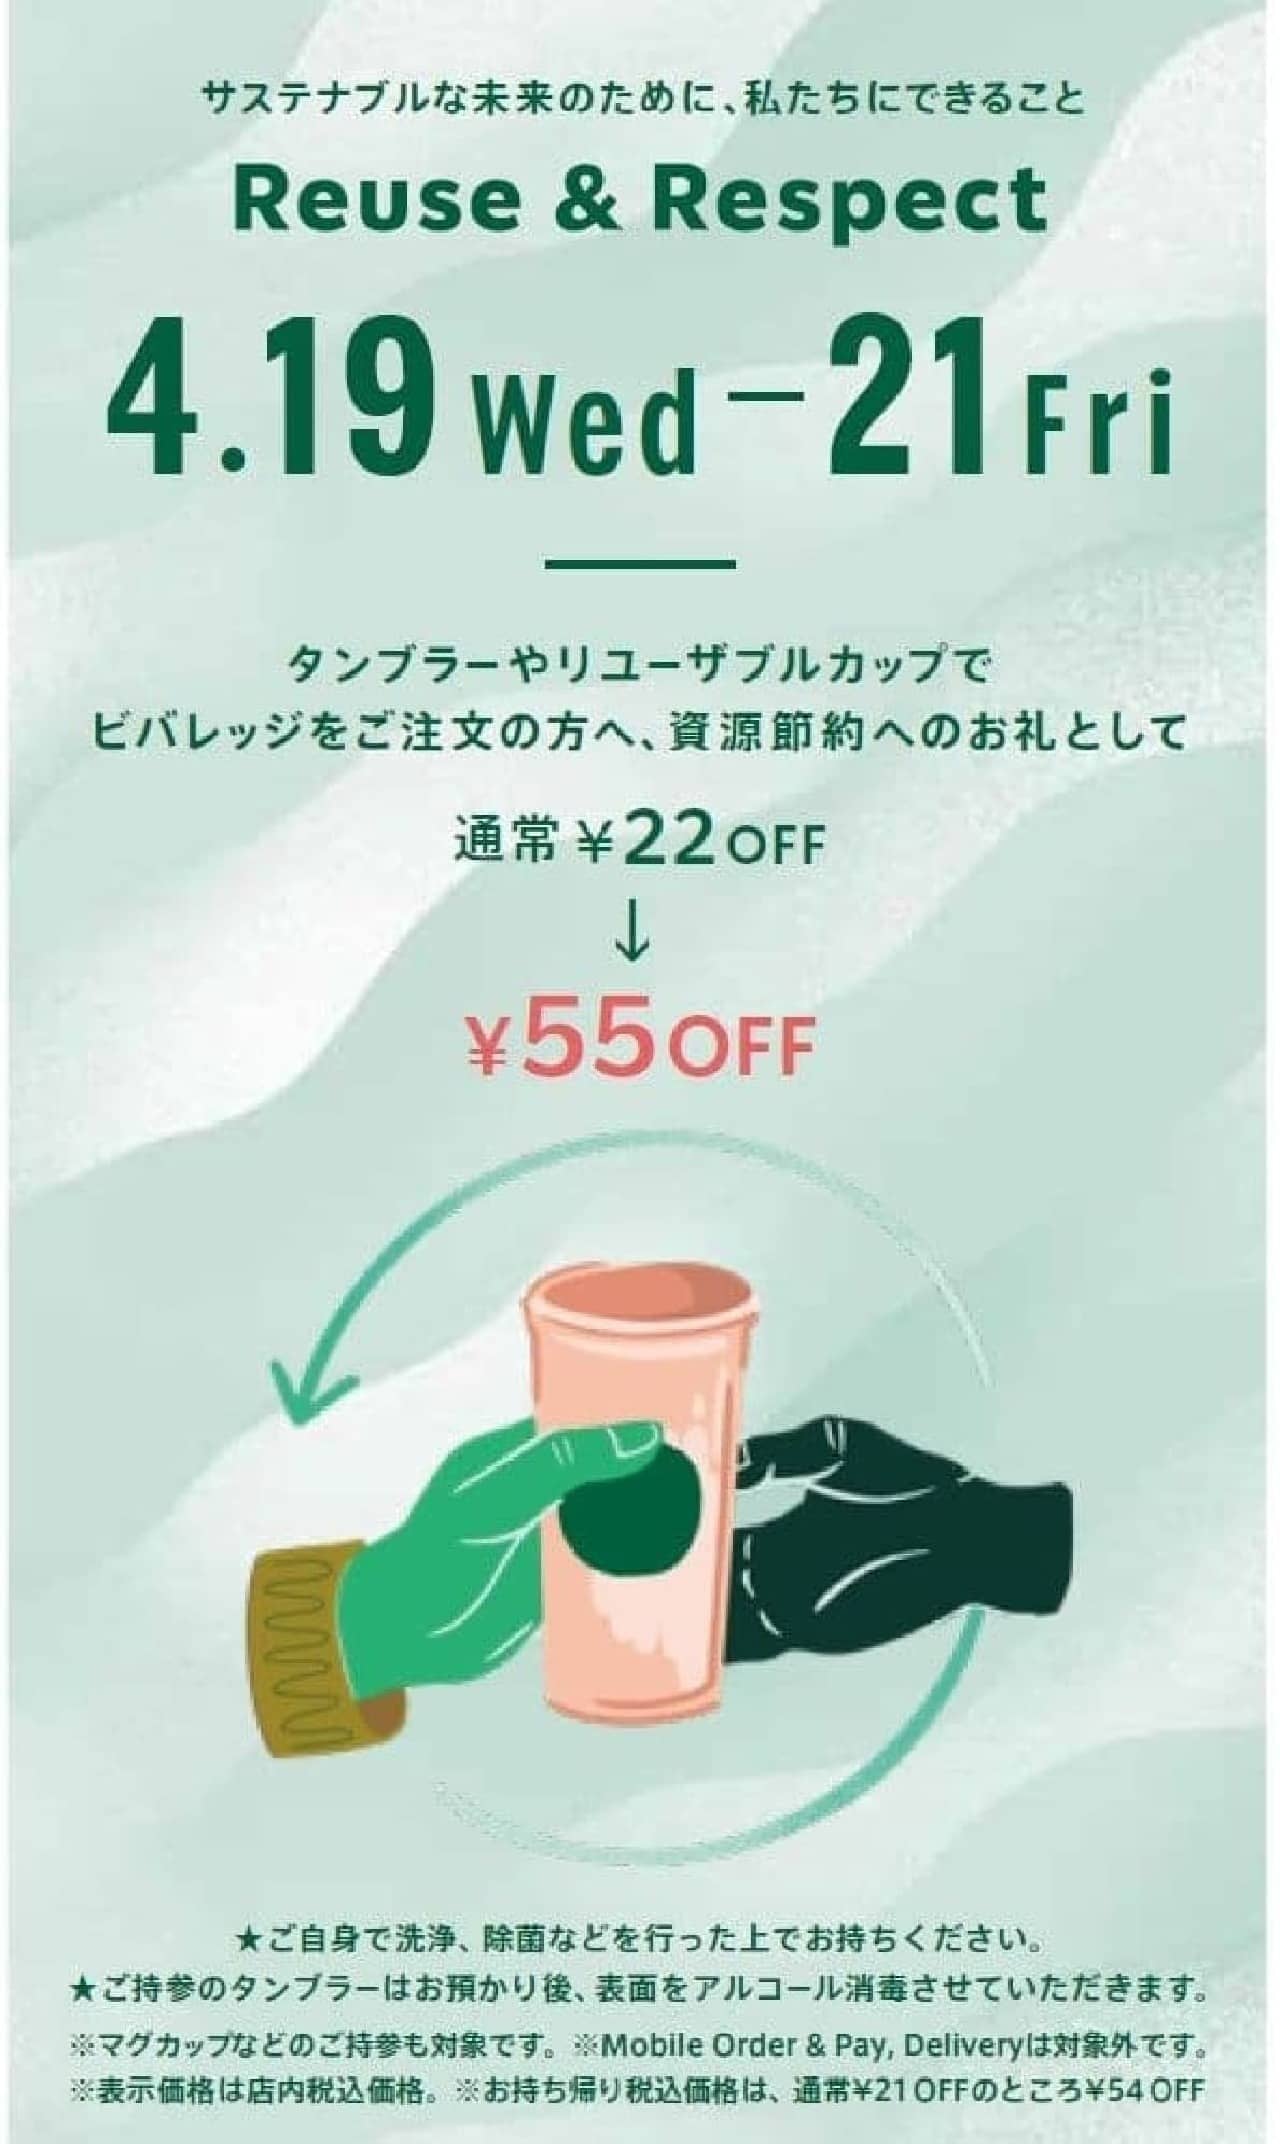 Bring your own Starbucks cup for 50 yen off